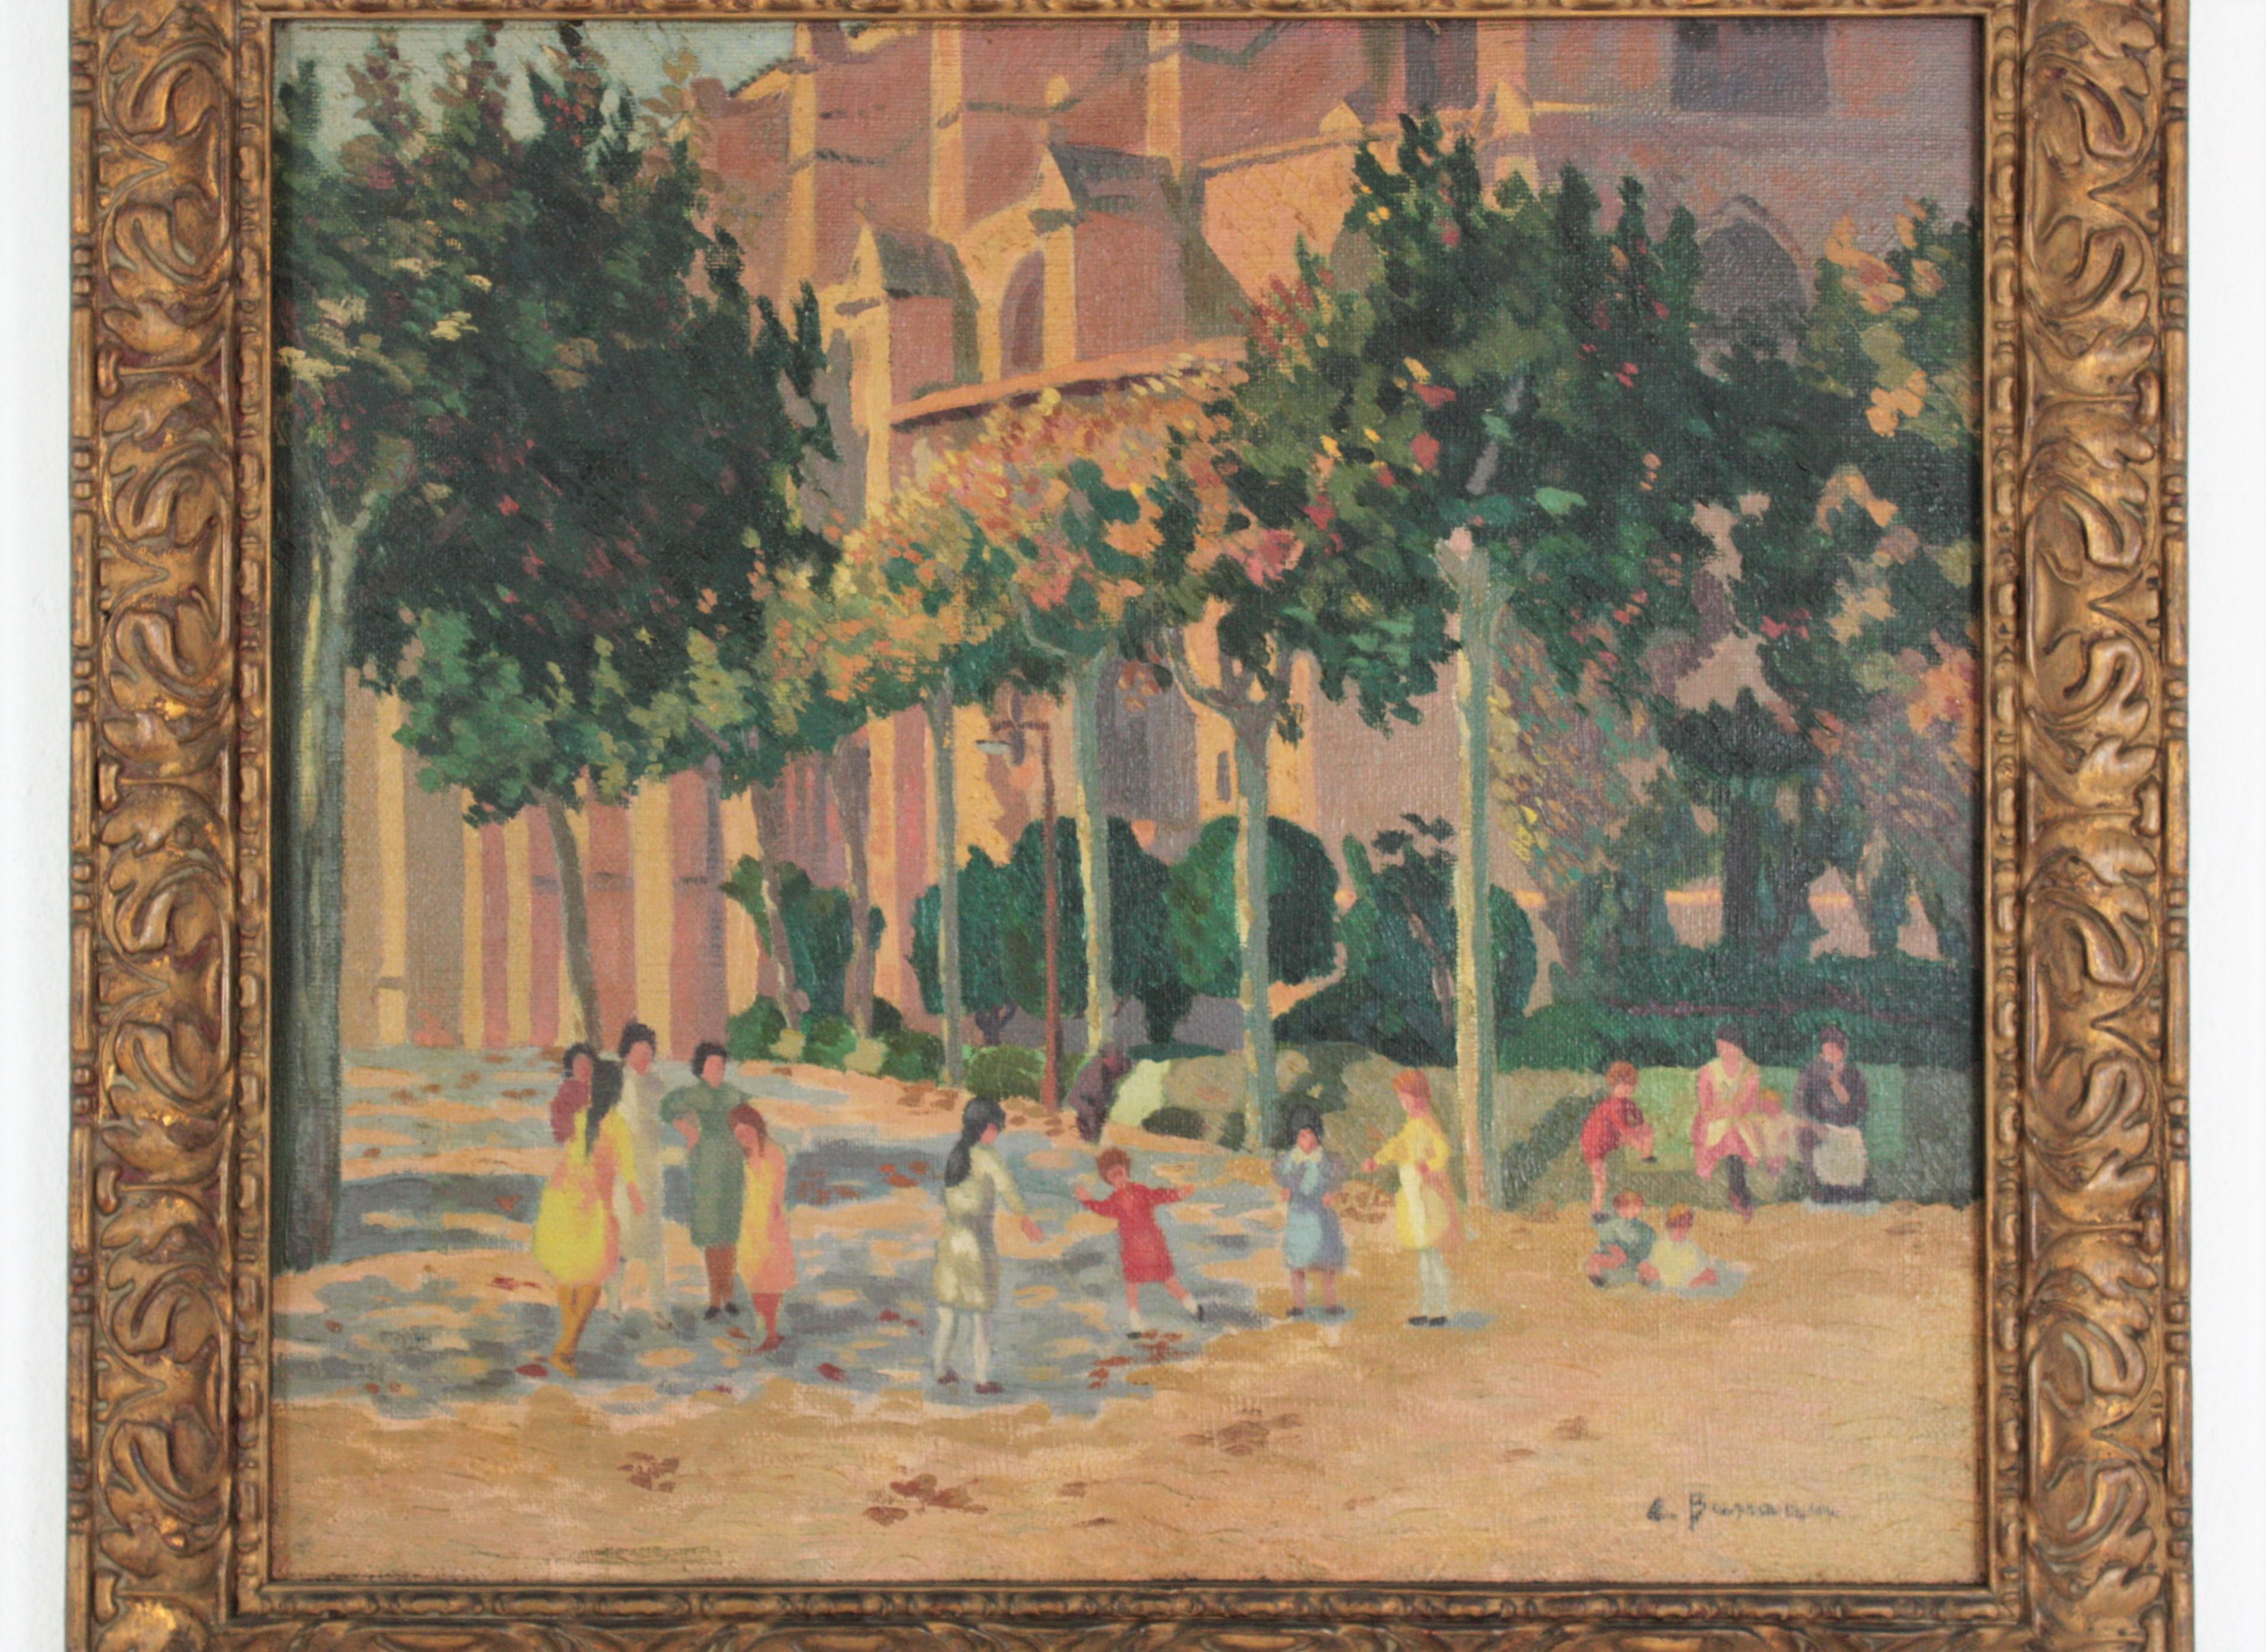 A colorful oil on canvas representing a group of children playing in a garden area near a Cathedral. Framed by a carved giltwood frame with foliage details.
Signed on the bottom left corner.
Illegelible signature
Spain, 1940s-1950s.
Overall